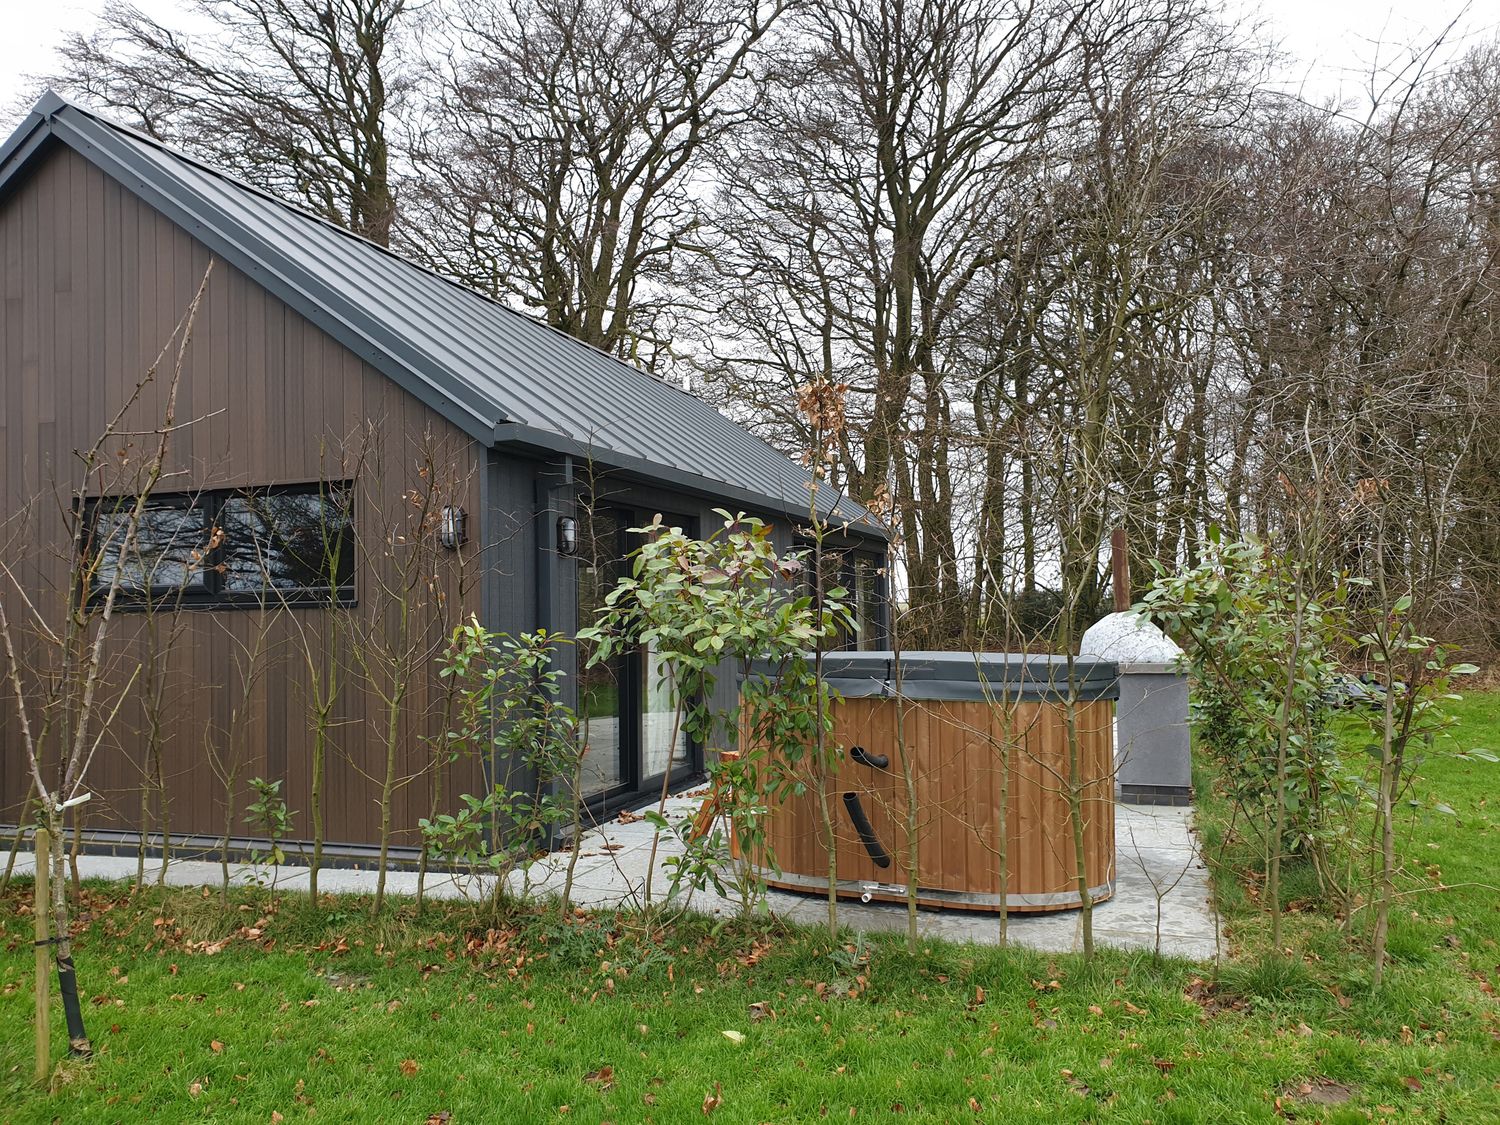 LODGE 3, near Bishop Wilton, East Riding of Yorkshire. Hot tub. Near North York Moors National Park.